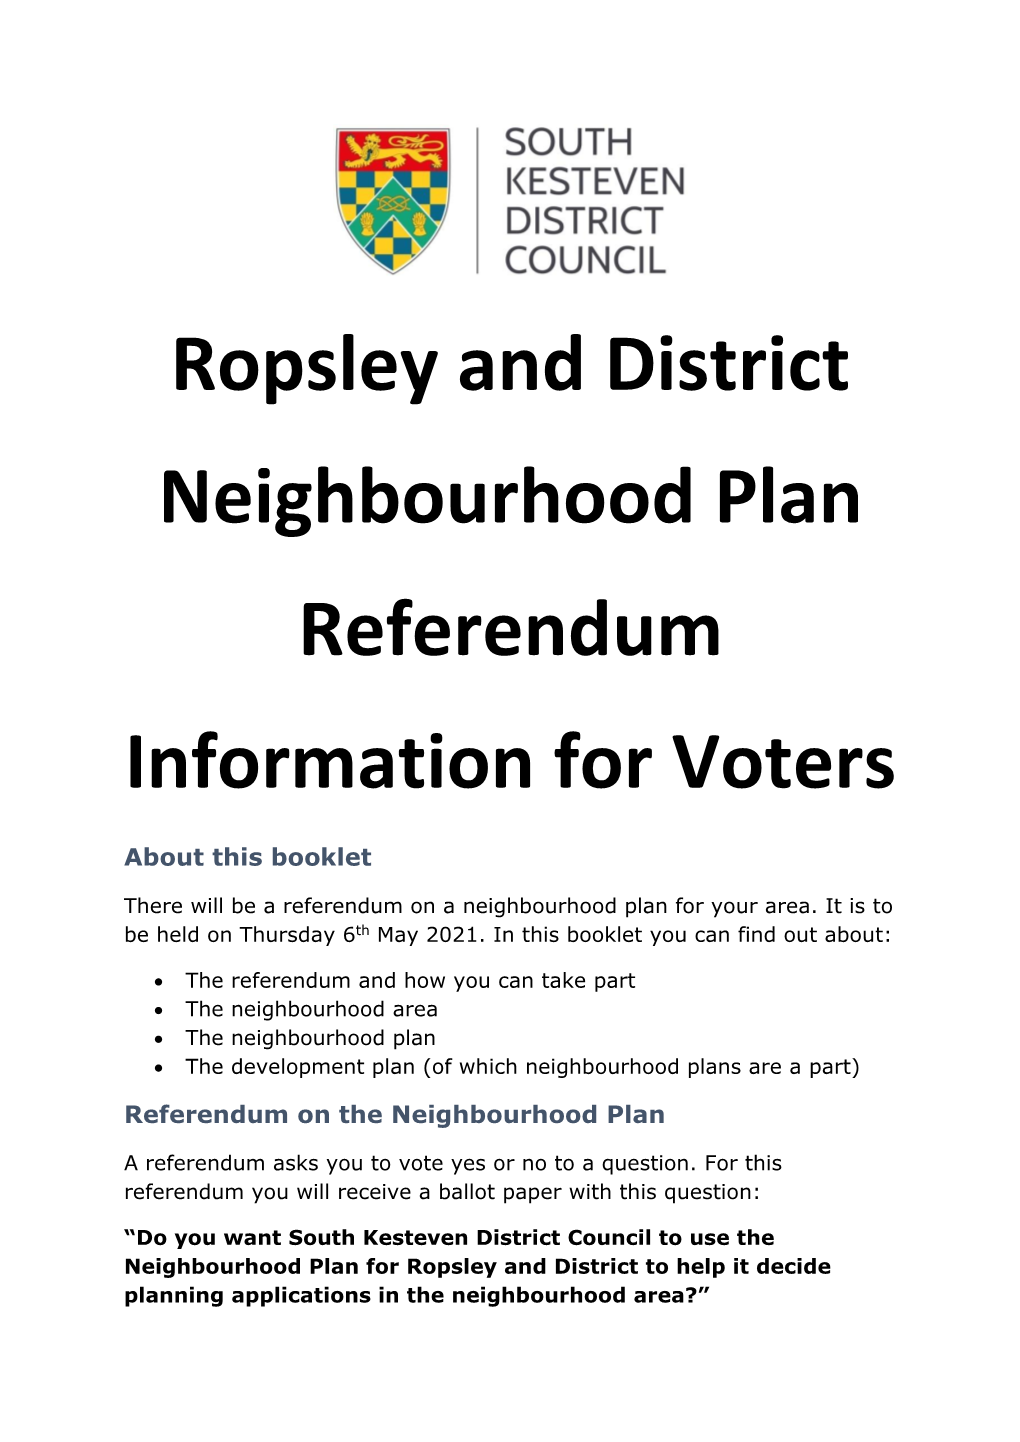 Ropsley and District Neighbourhood Plan Referendum Information for Voters